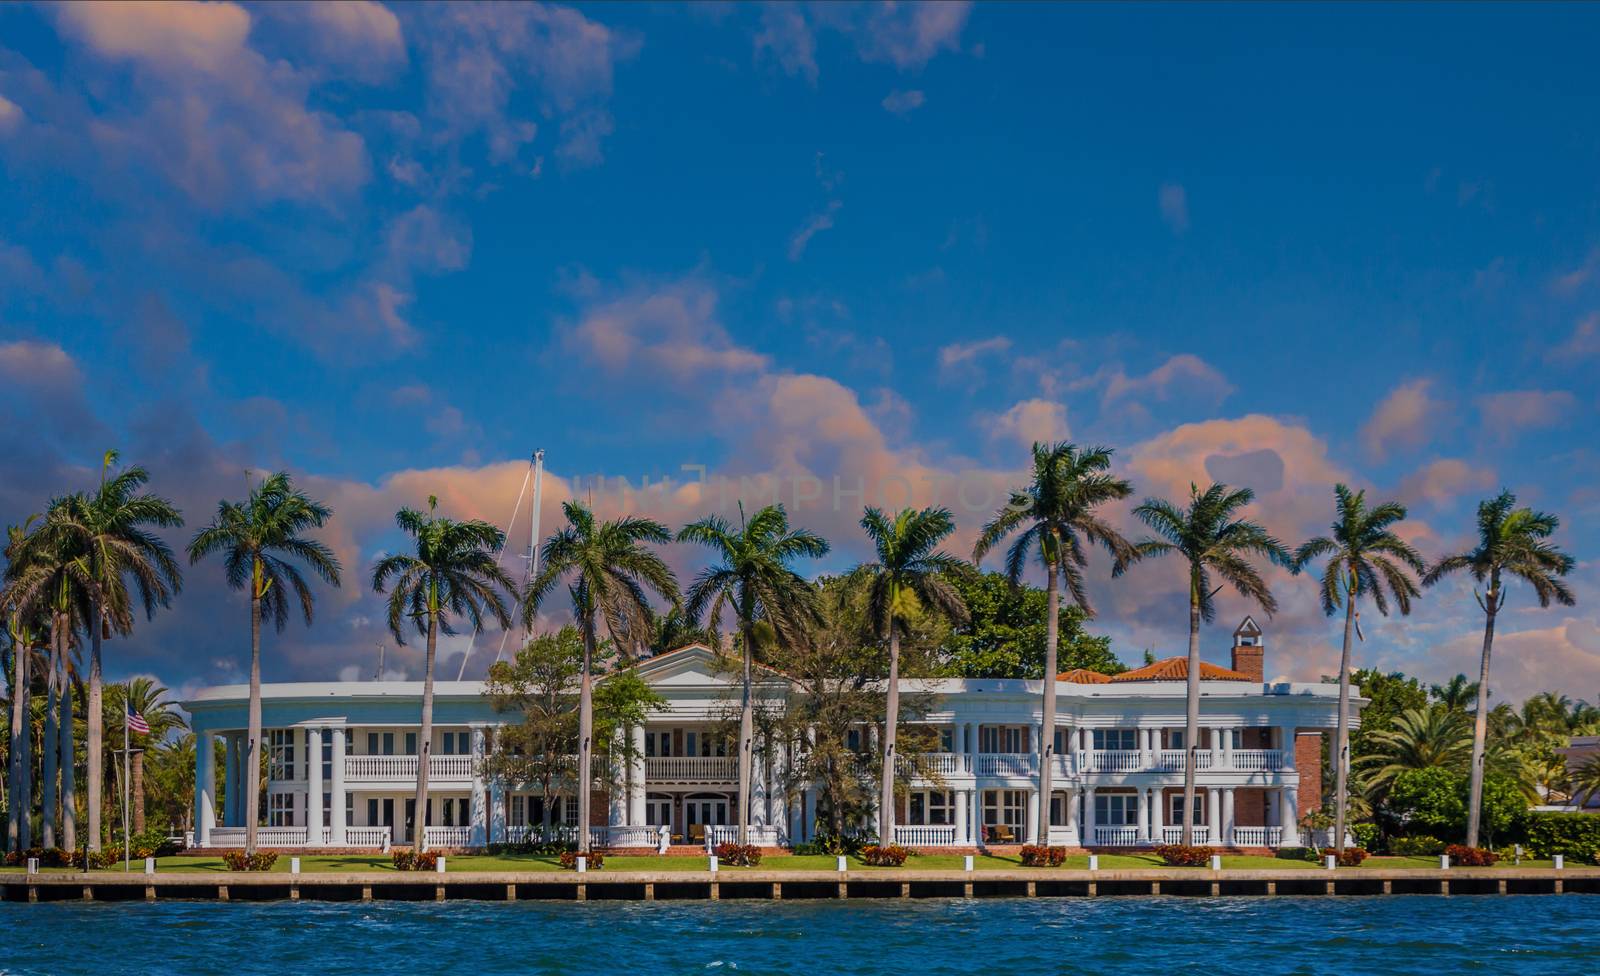 Large House in Lauderdale with Columns at Dusk by dbvirago